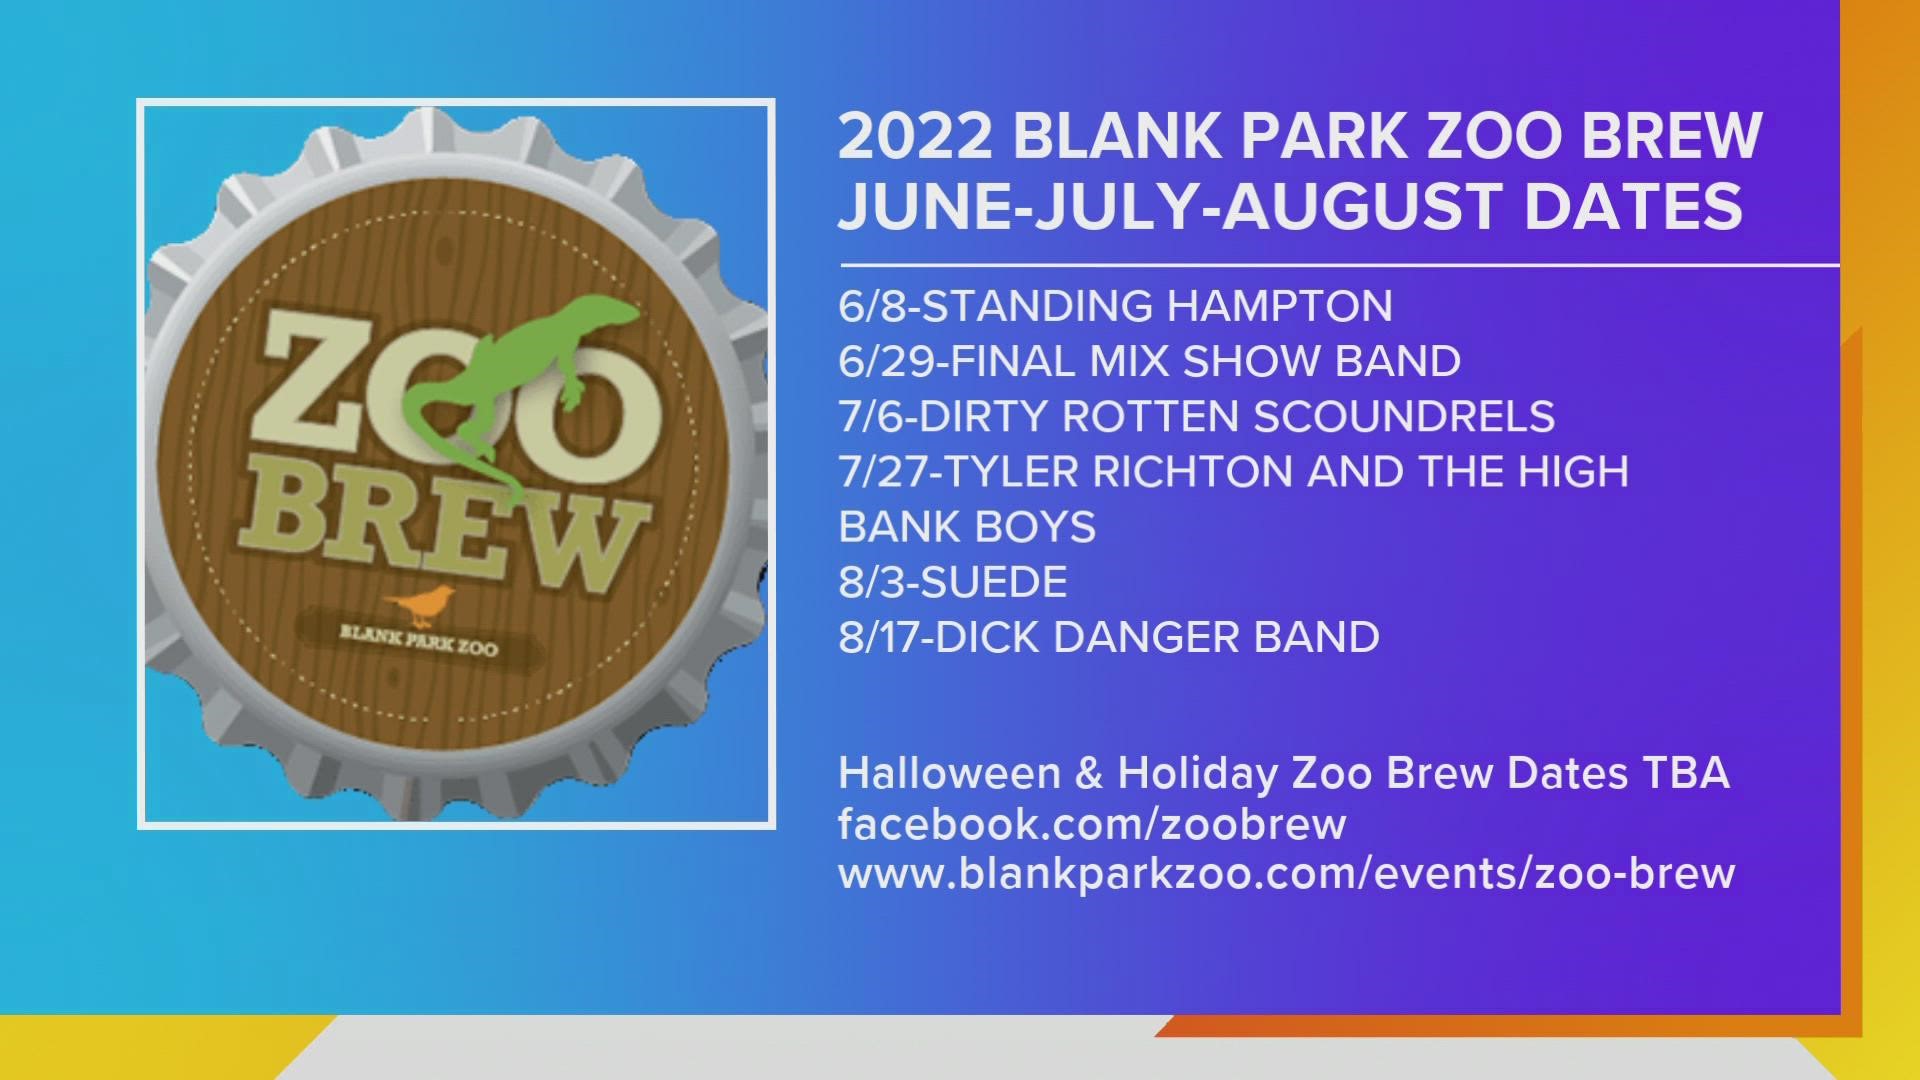 2022 ZOO BREW at Blank Park Zoo Dates and Bands Revealed!